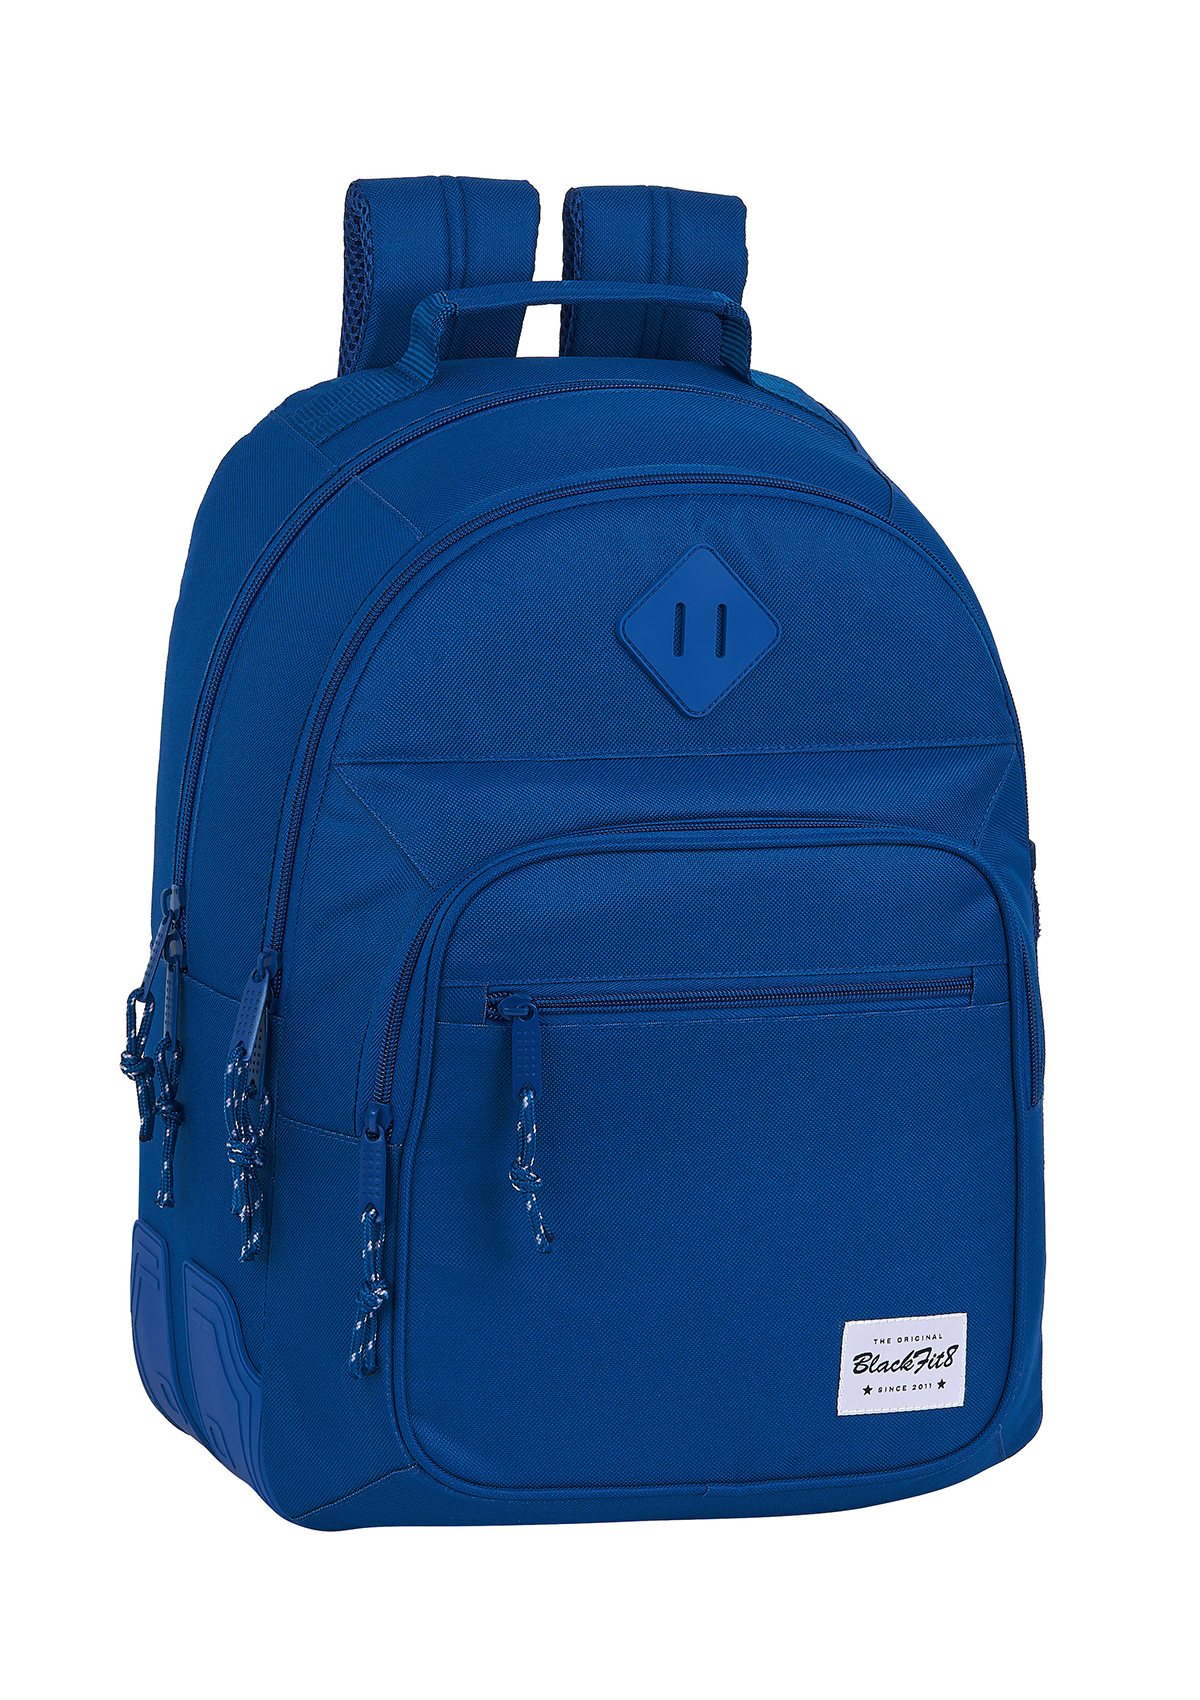 Blackfit8 Double Blue Oxford Large Backpack